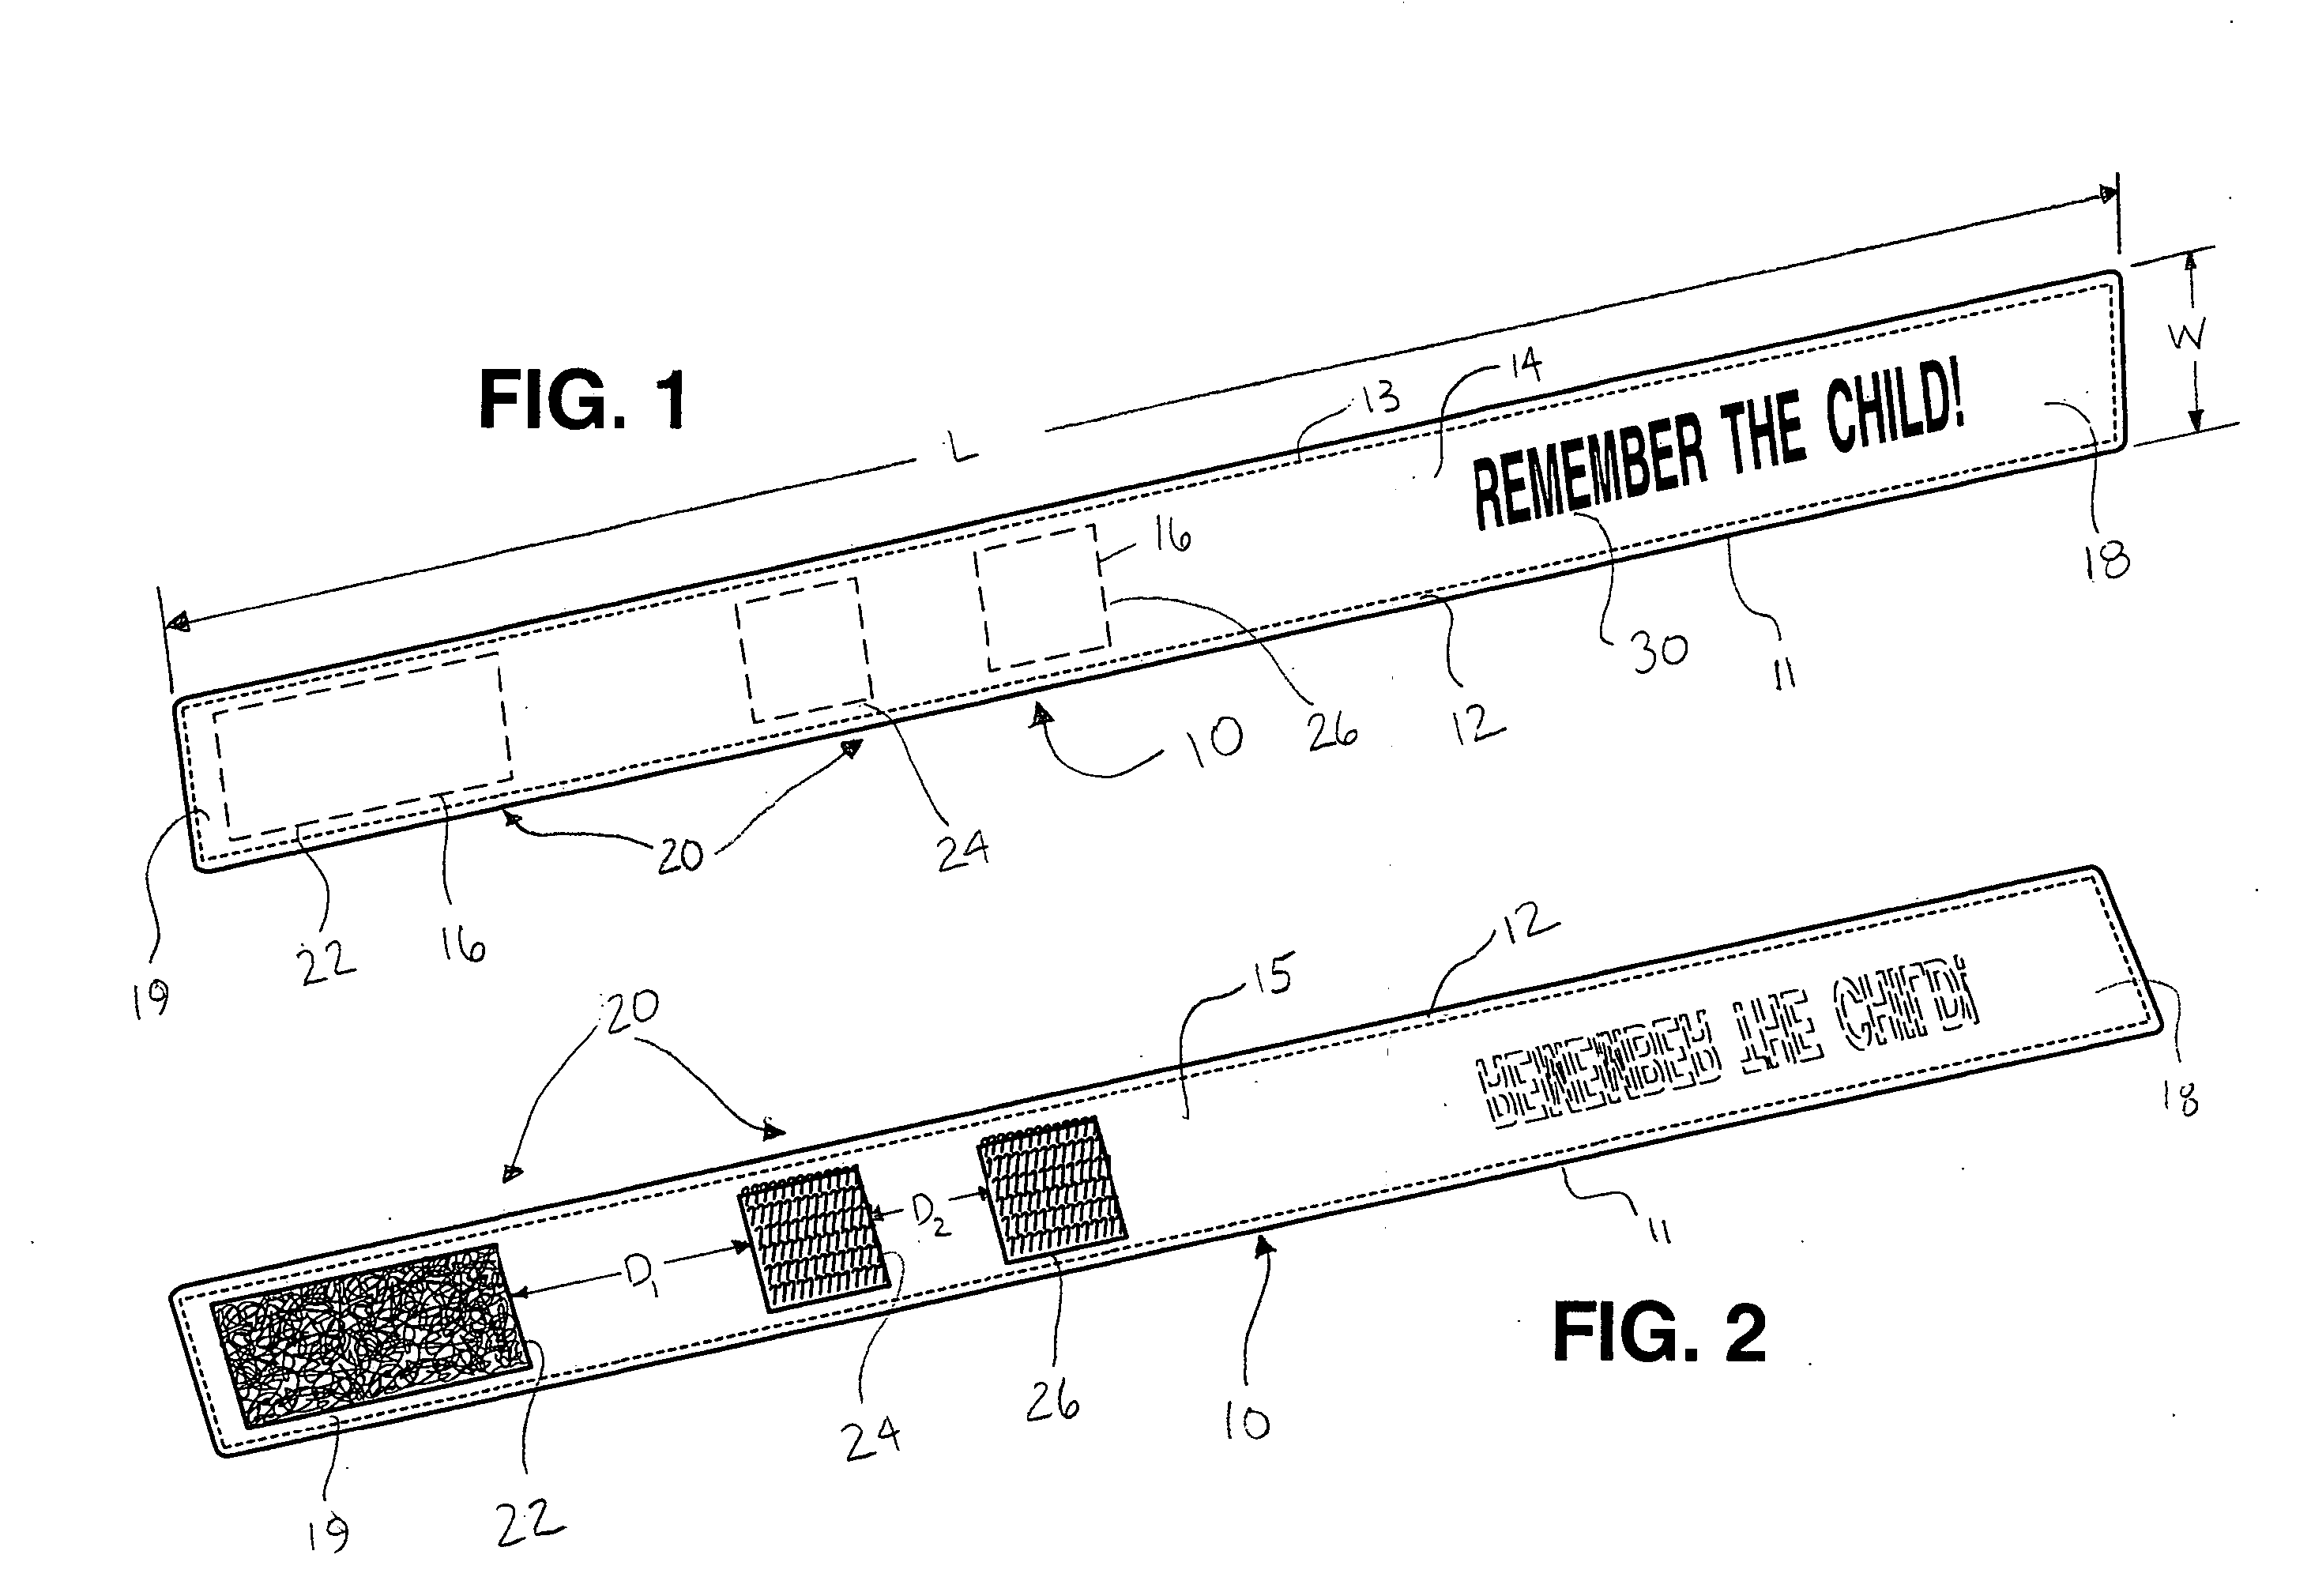 Memory triggering device and method of use for the same